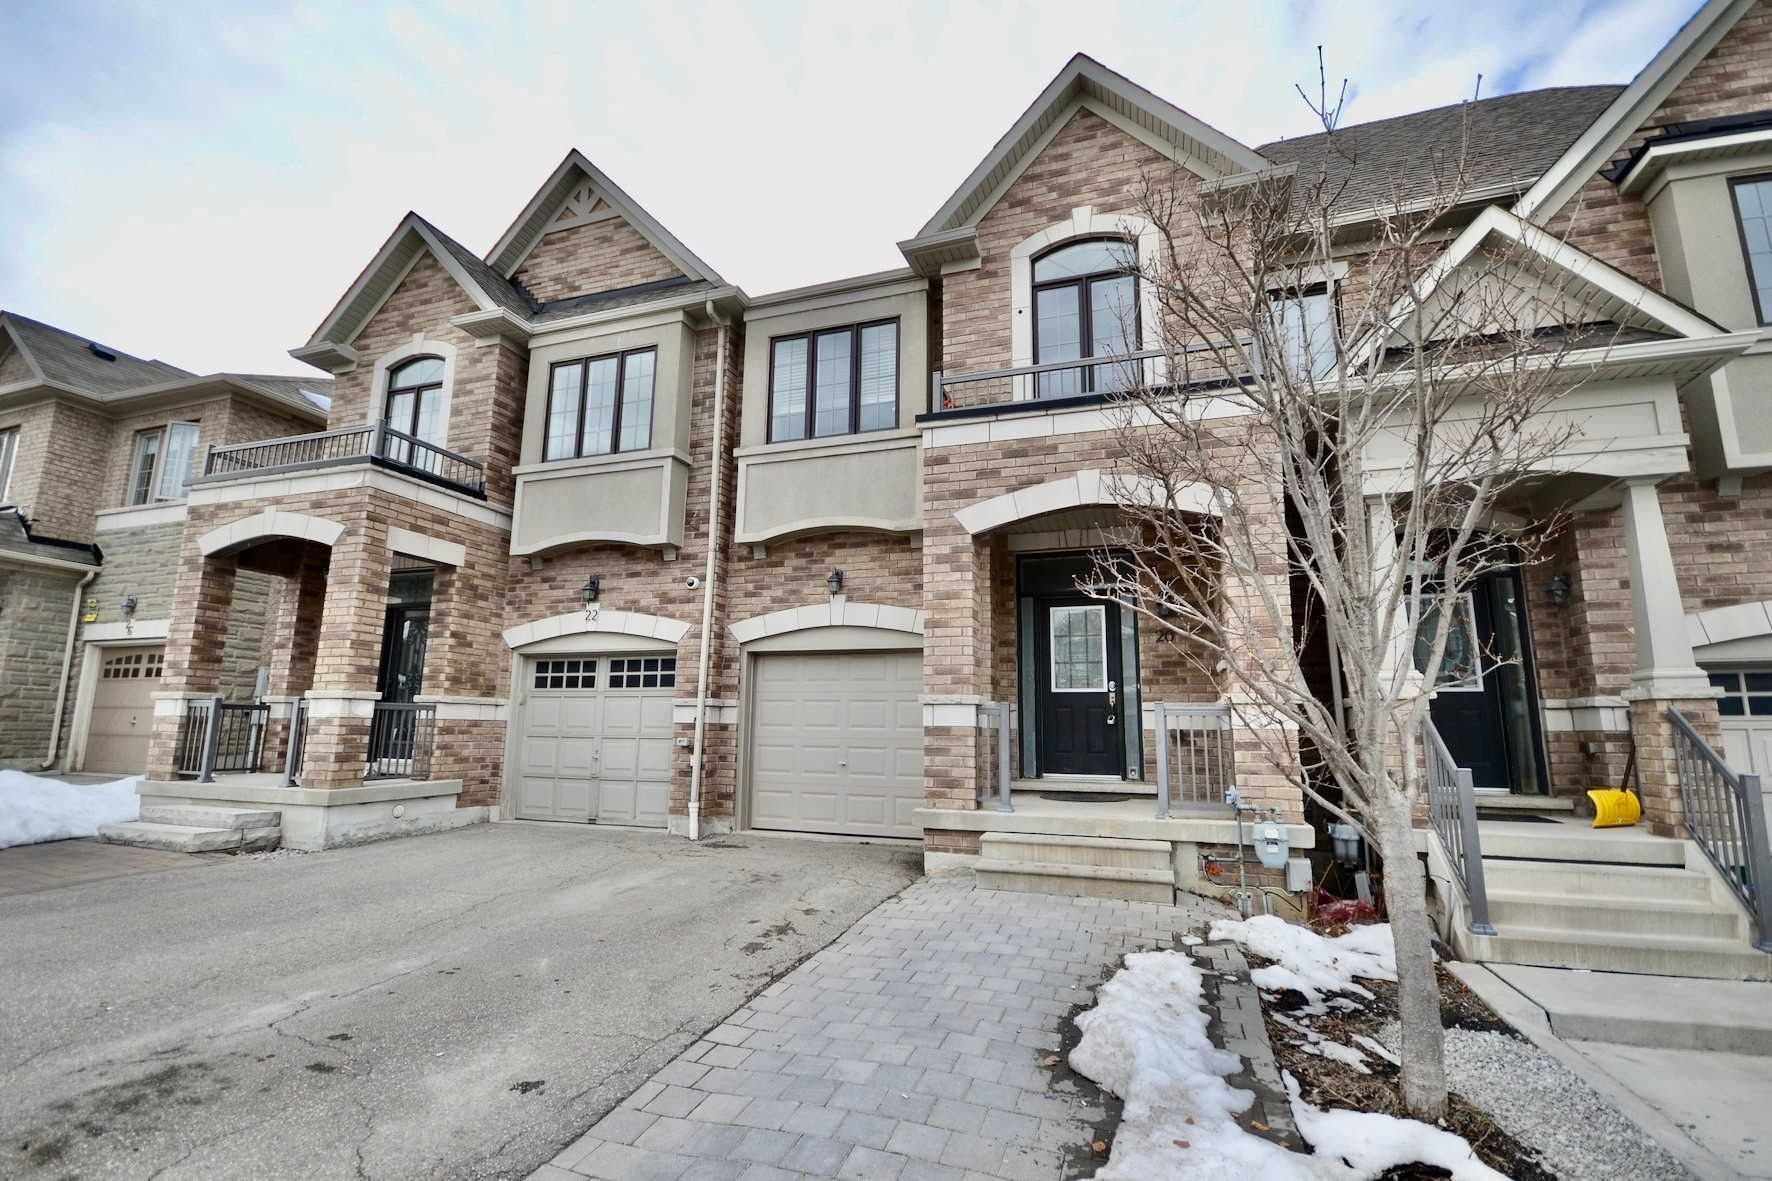 Main Photo: Vaughan Townhouse For Lease In The Heart of Vellore Village! For More Info Contact Marie Commisso & Steven J Commisso Vaughan Real Estate vaughancondoexperts.com